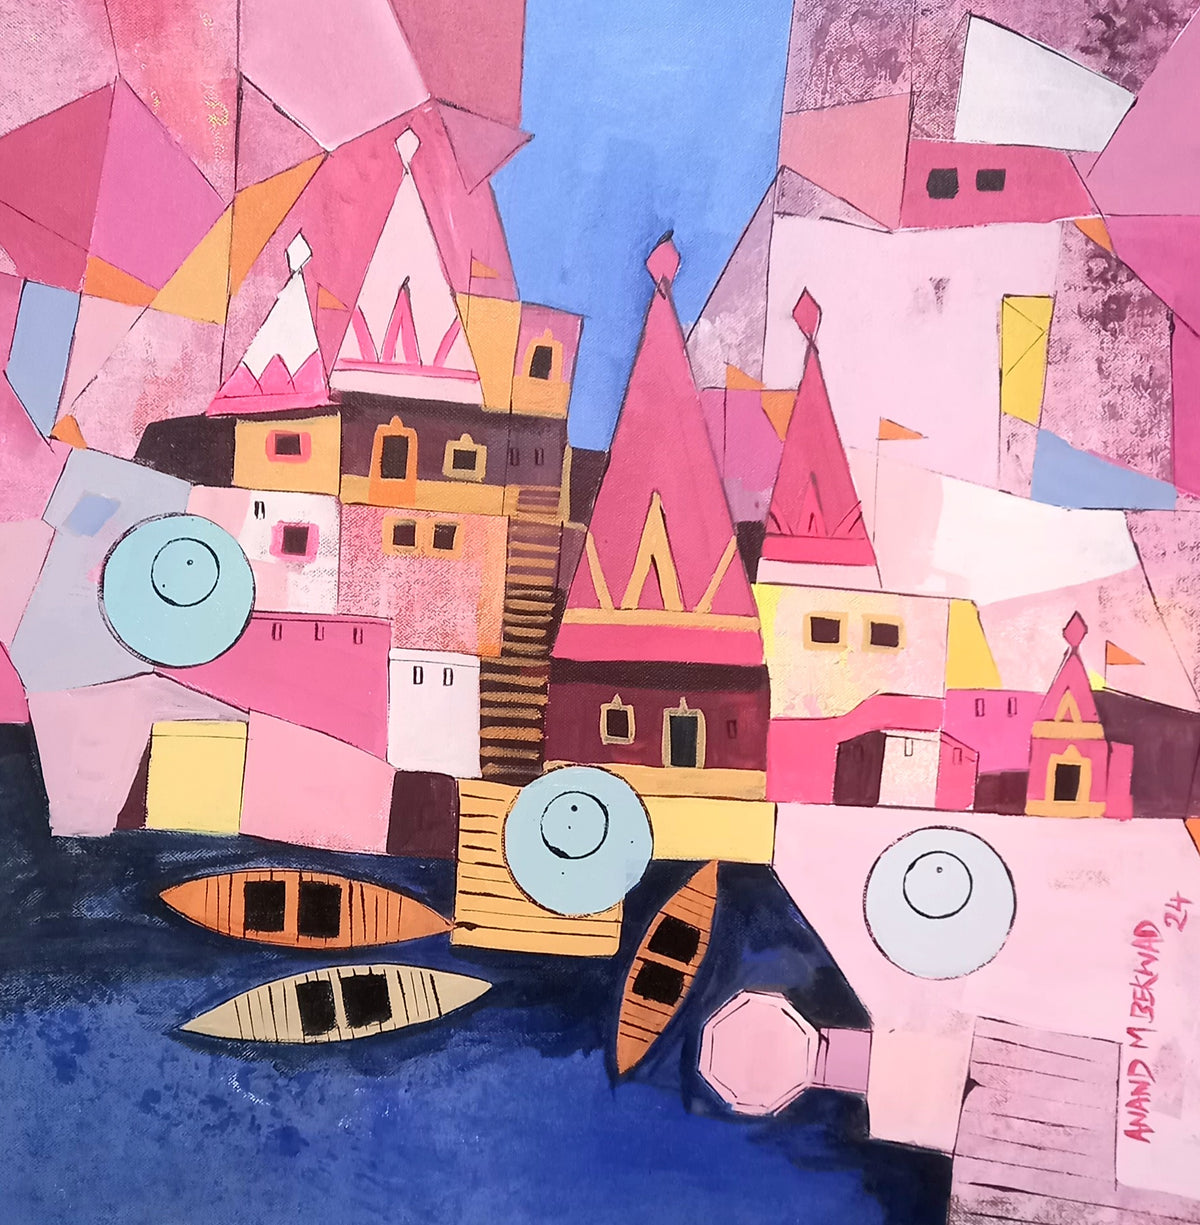 Benaras series by Anand Bekwad in blue and pink hues